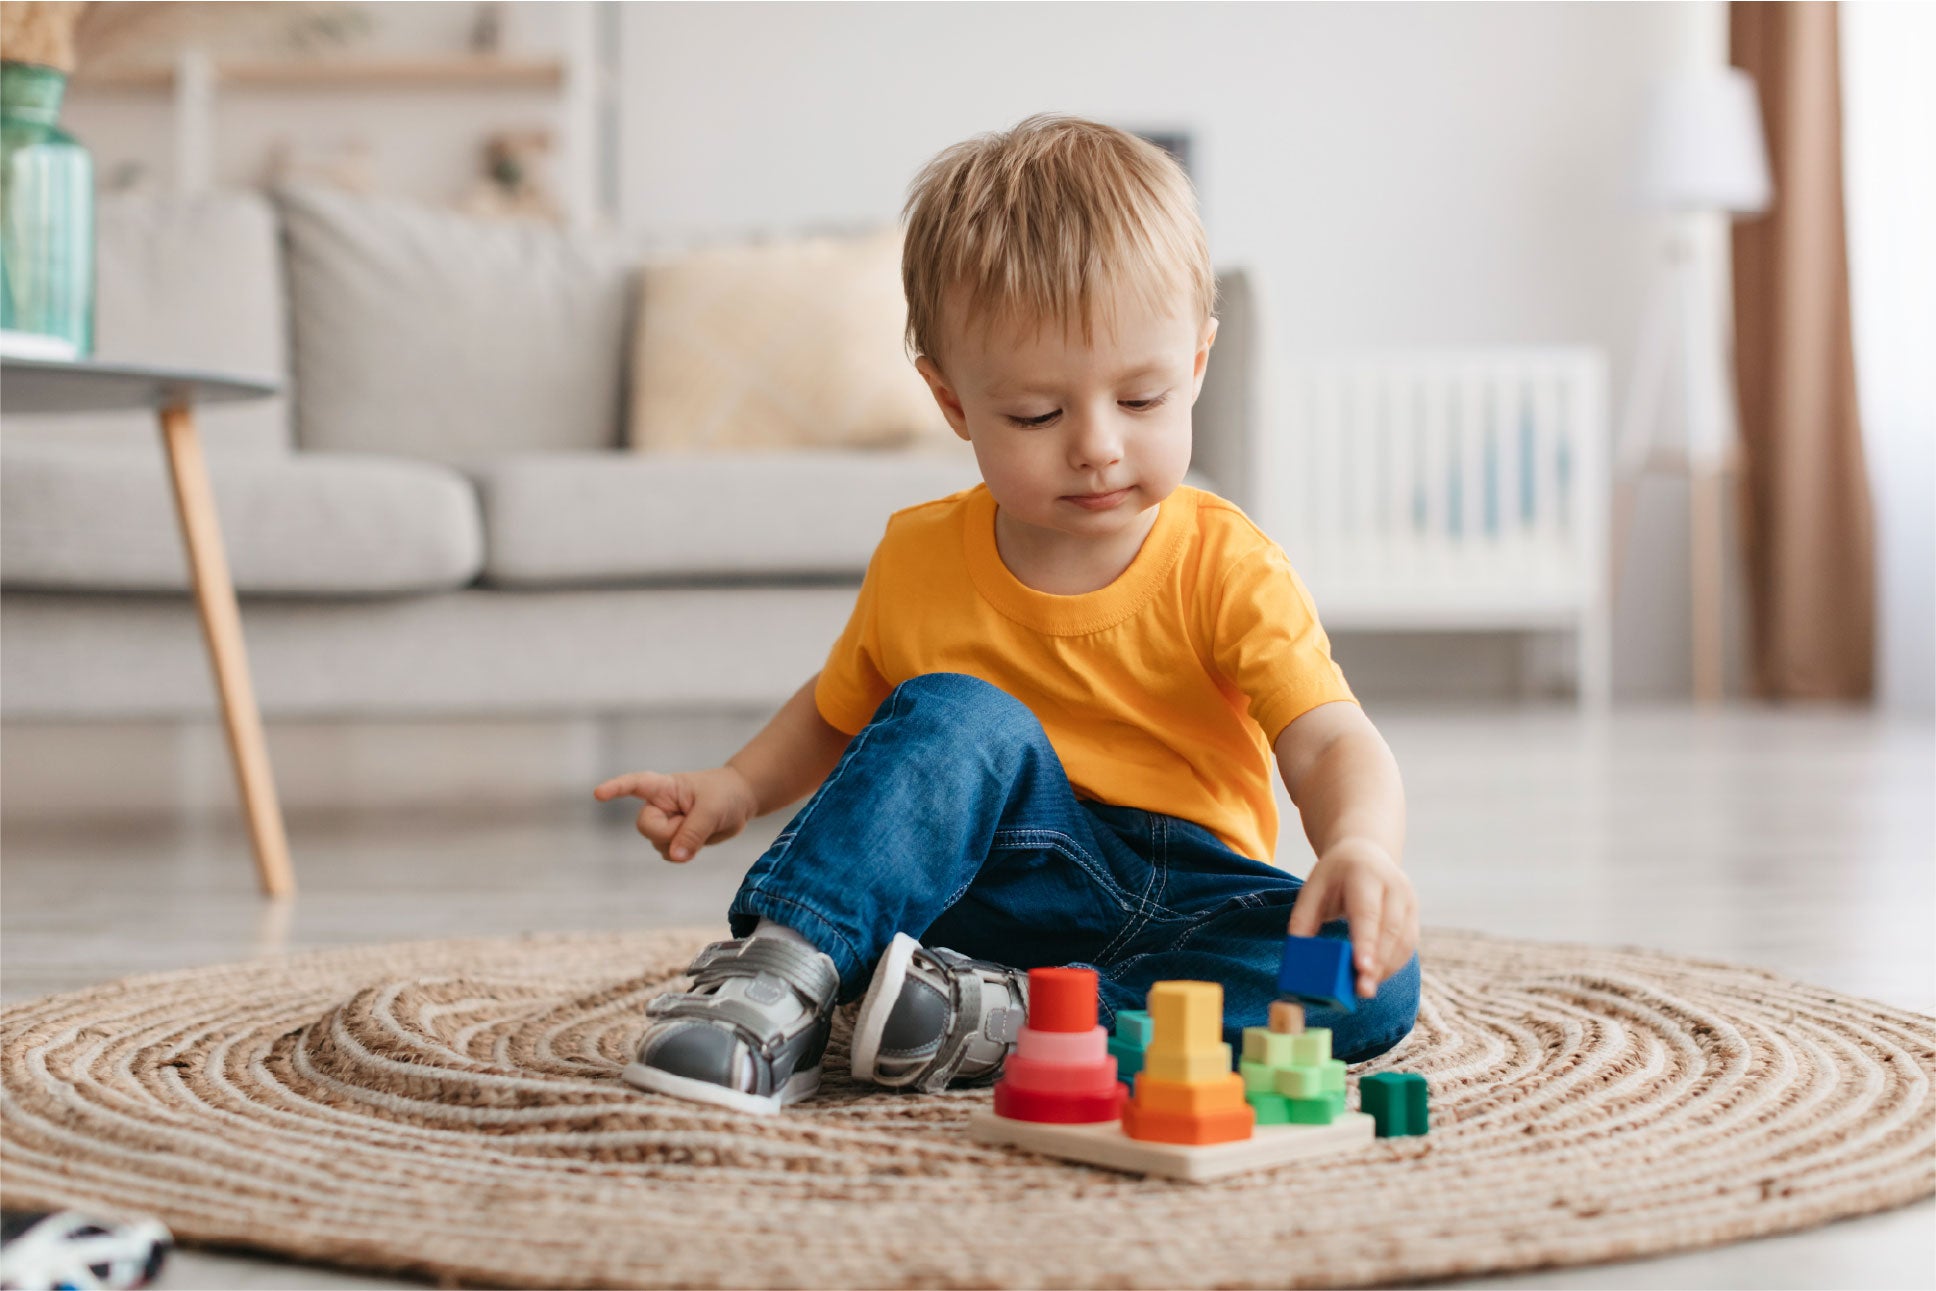 Child playing with wooden shapes